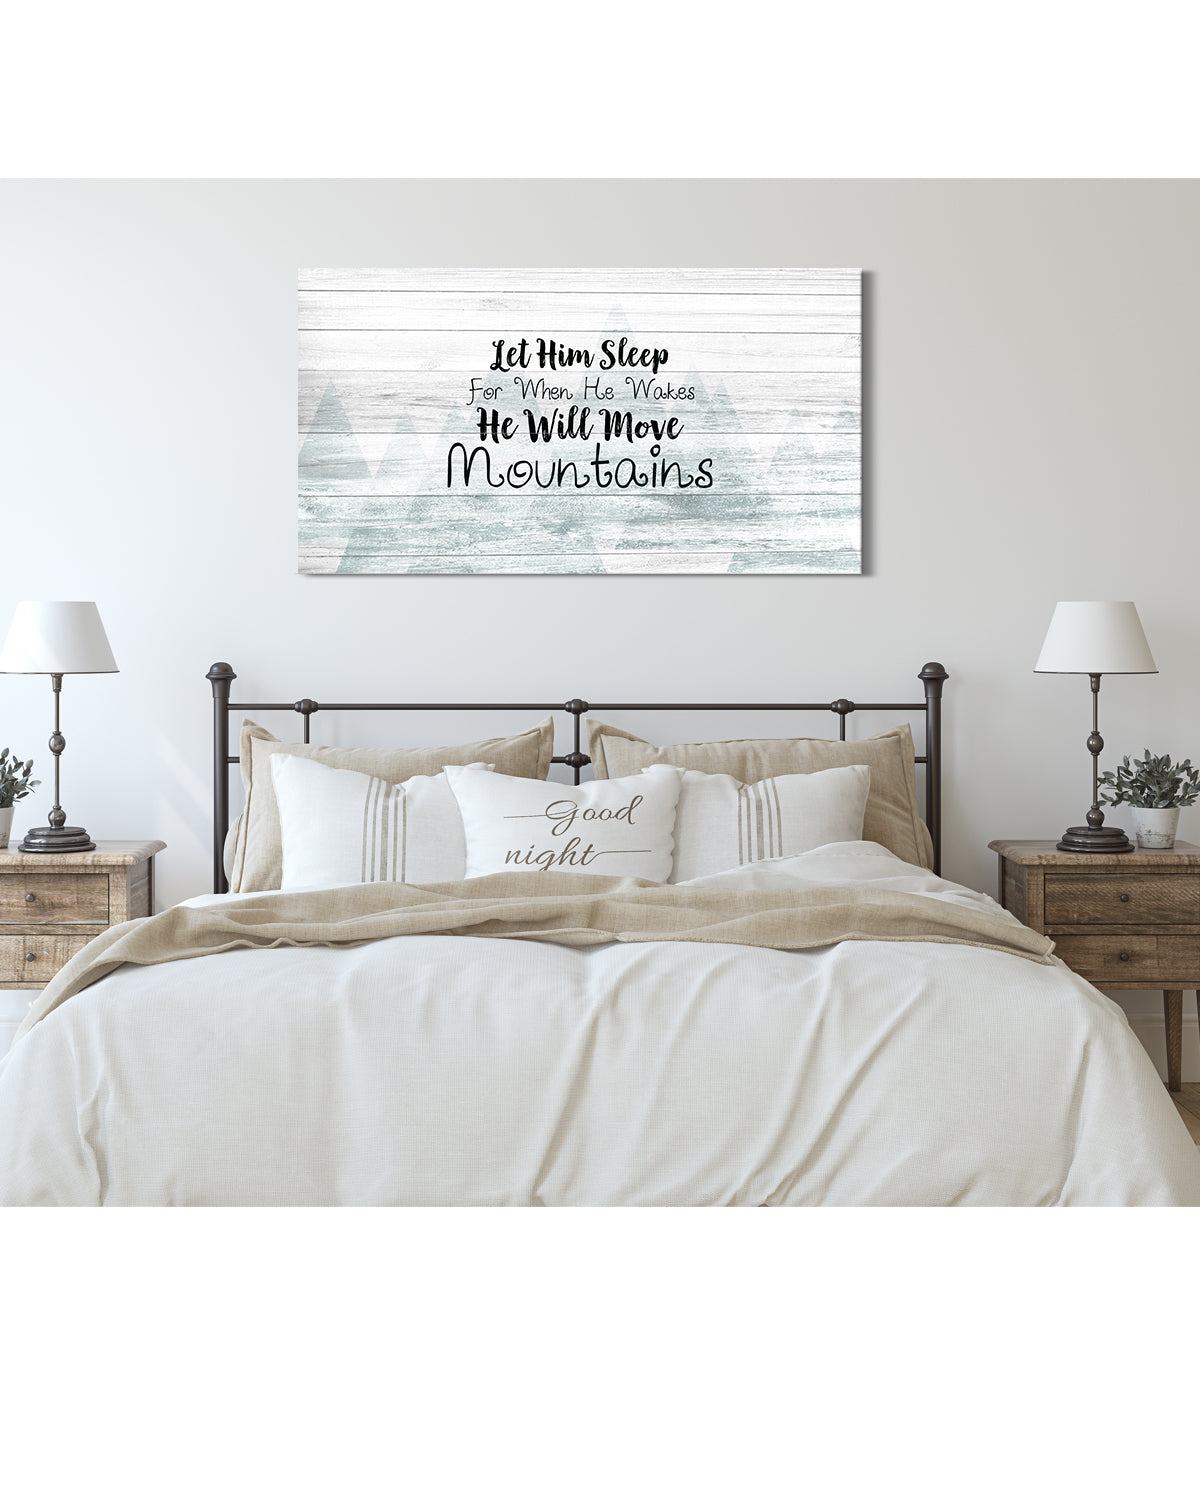 Let Him Sleep For When He Wakes He Will Move Mountains Wall Decor Art Canvas ready to hang